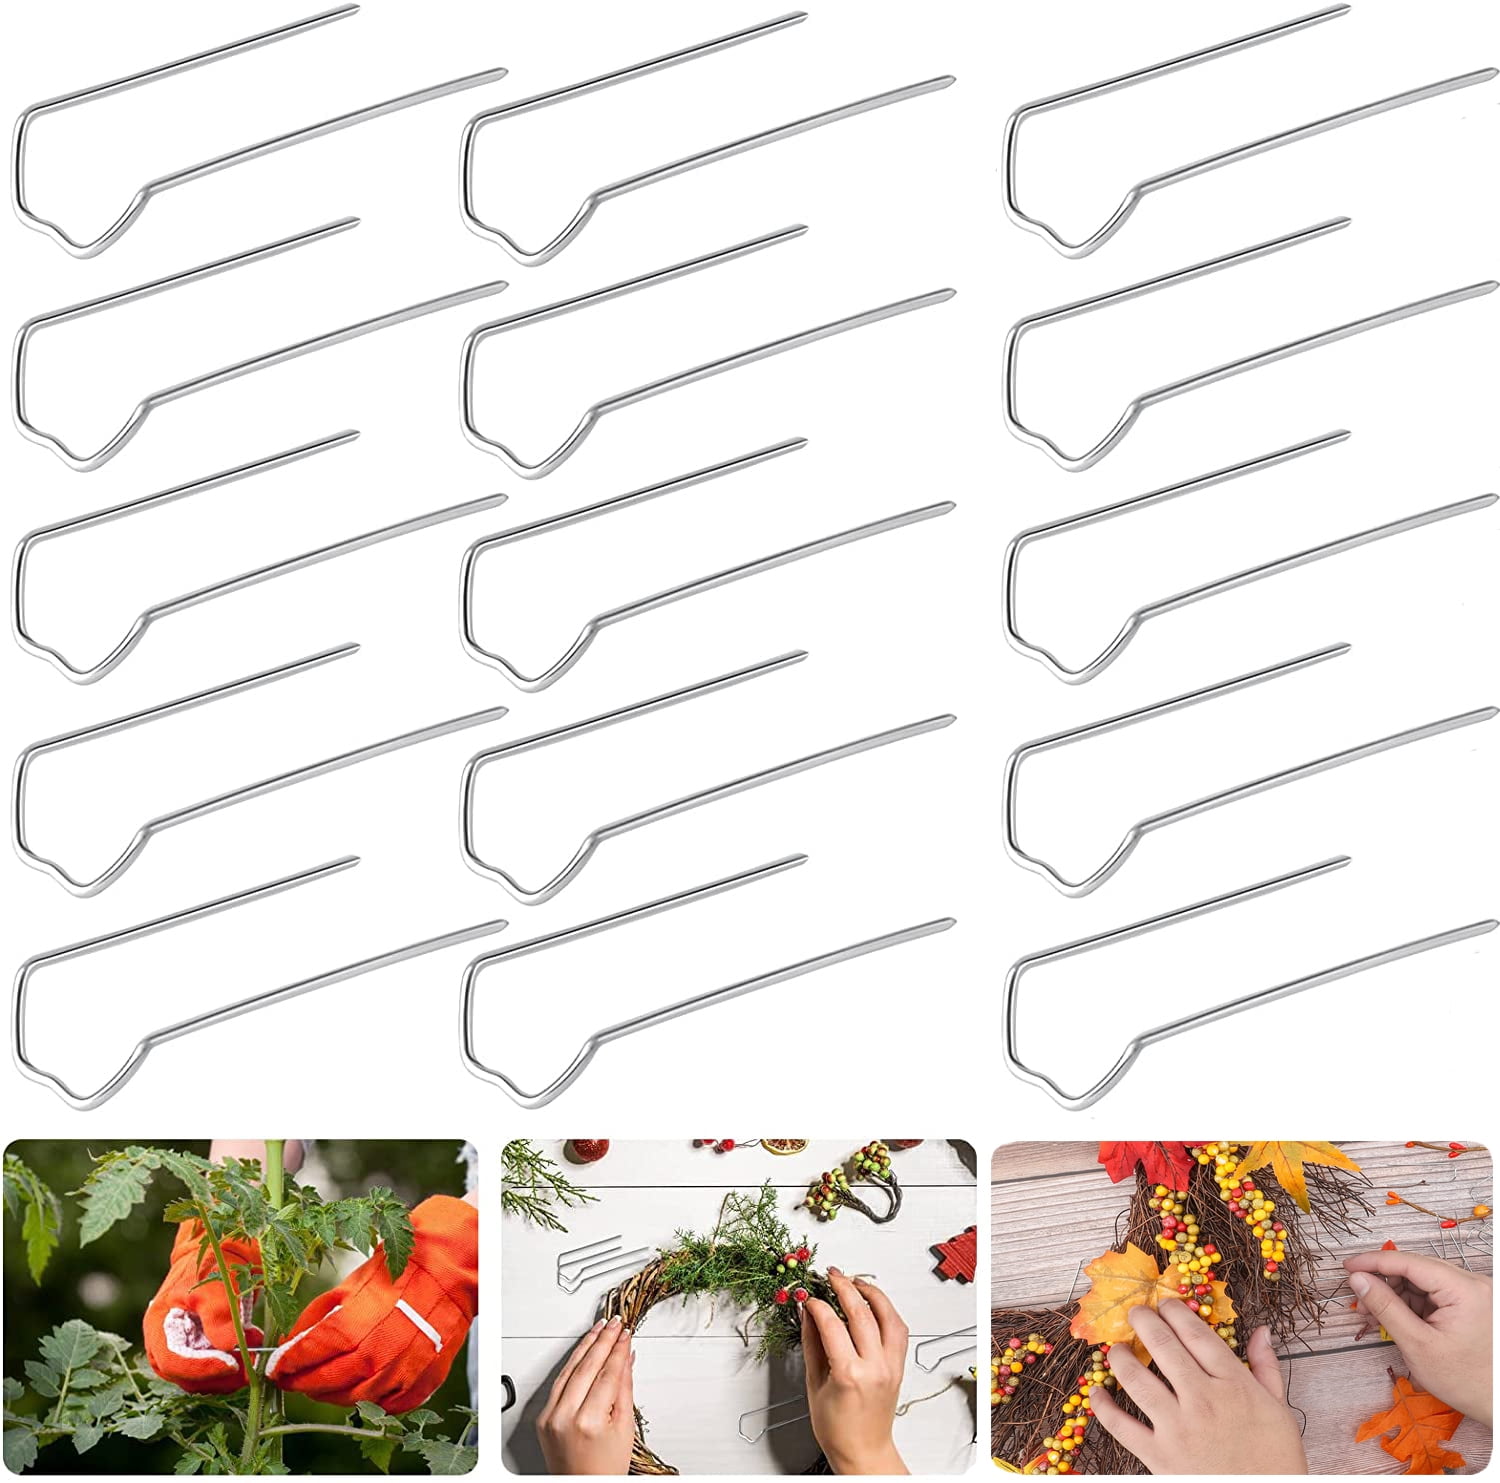 Floral Supply Online 2 inch Greening Pins (600 Pieces) - Floral Fern Pins for Straw Wreaths, Holiday Arrangements, Craft Projects. Bulk Buy Quantities